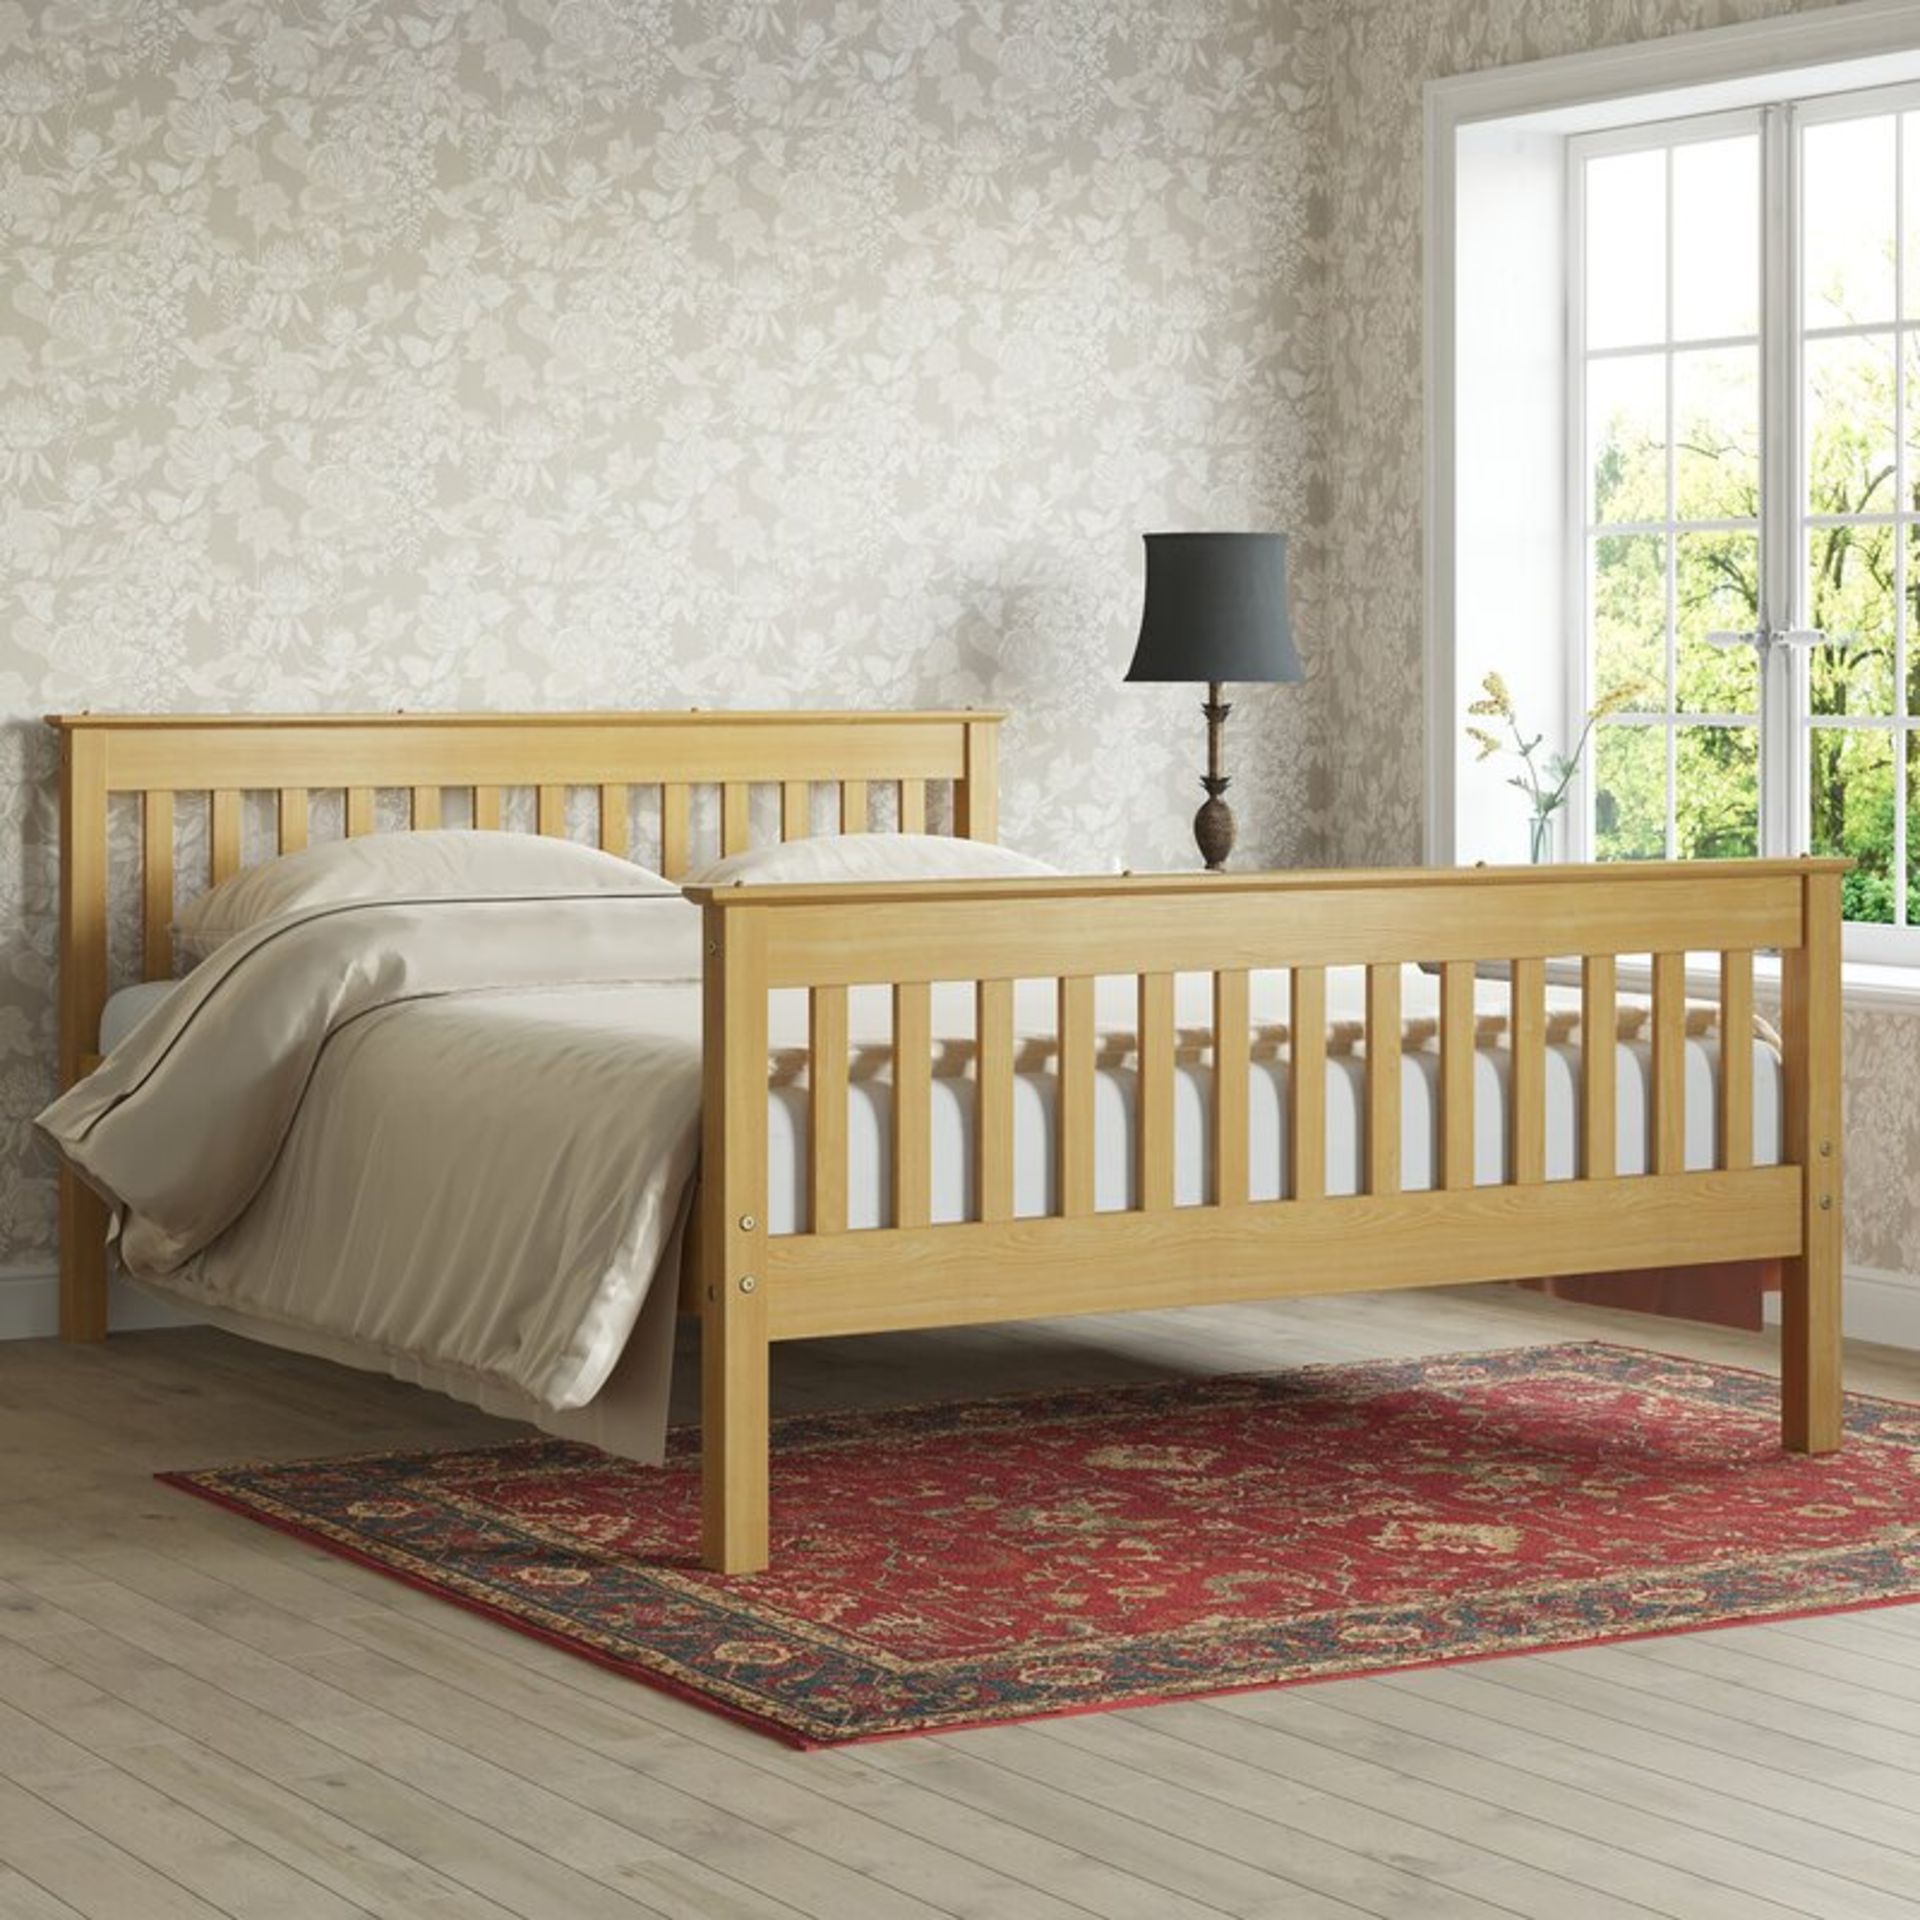 BOXED HEARTHSTONE BEDFRAME SIZE DOUBLE RRP £155.99 Condition ReportAppraisal Available on Request-